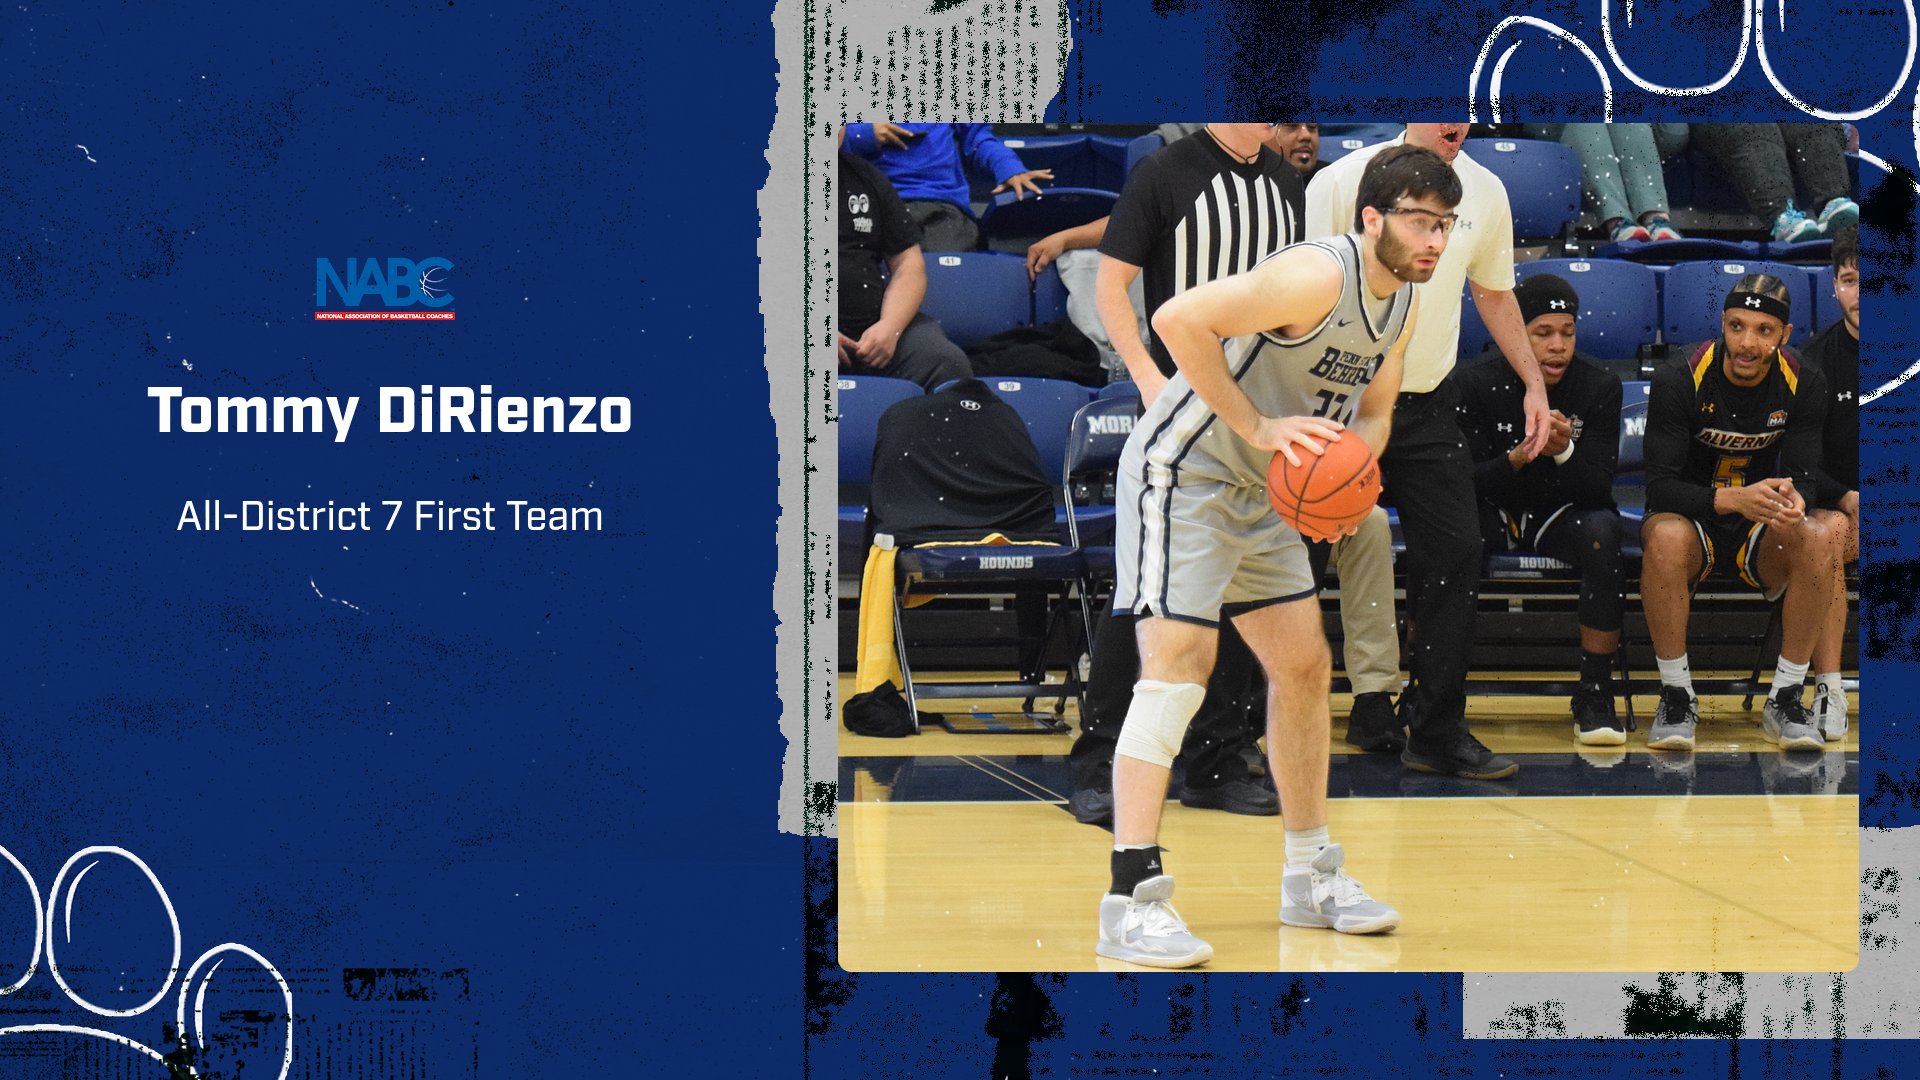 DiRienzo Selected To NABC All-District 7 First Team, All-ECAC First Team, and D3hoops All-Region Third Team